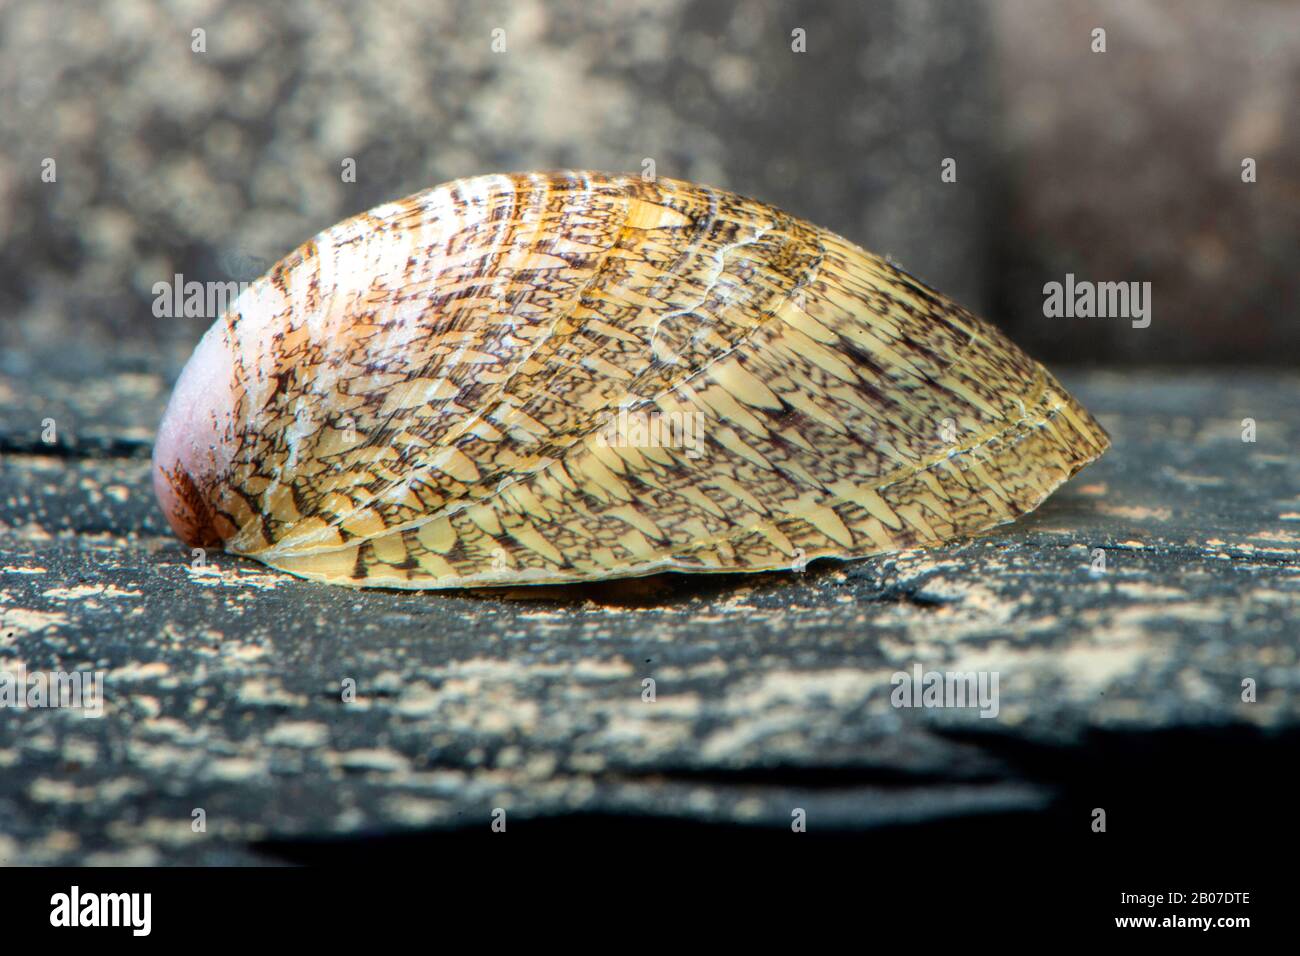 Freshwater Snail (Septaria porcellana), on a stone under water Stock Photo